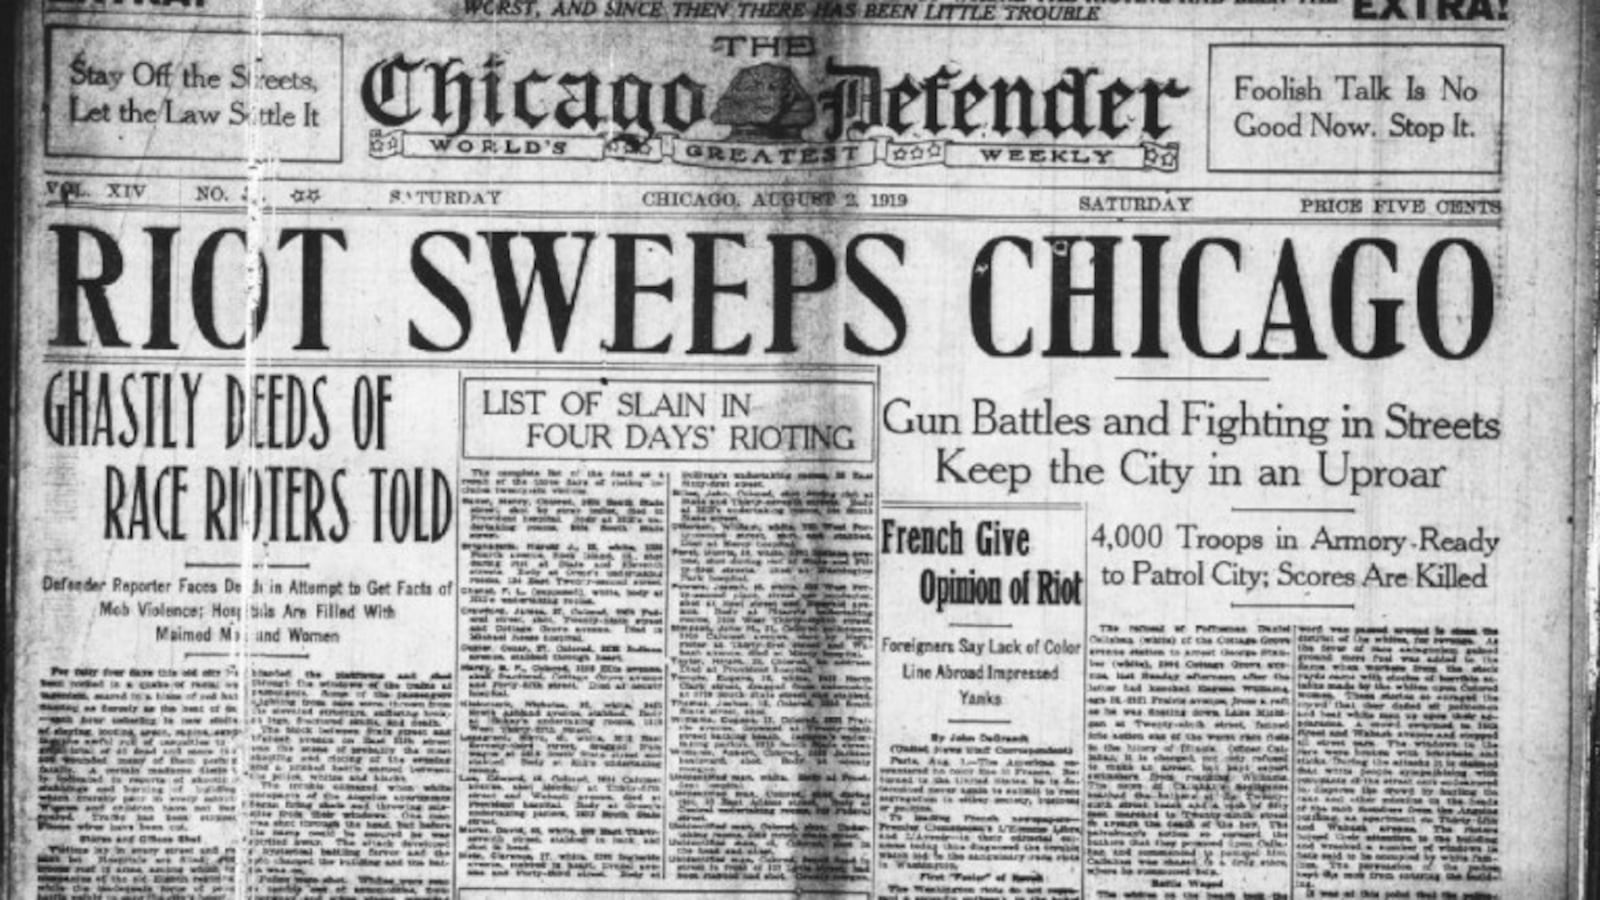 The front page of the Chicago Defender on August 2, 1919. Race riots broke out across the city for seven days.